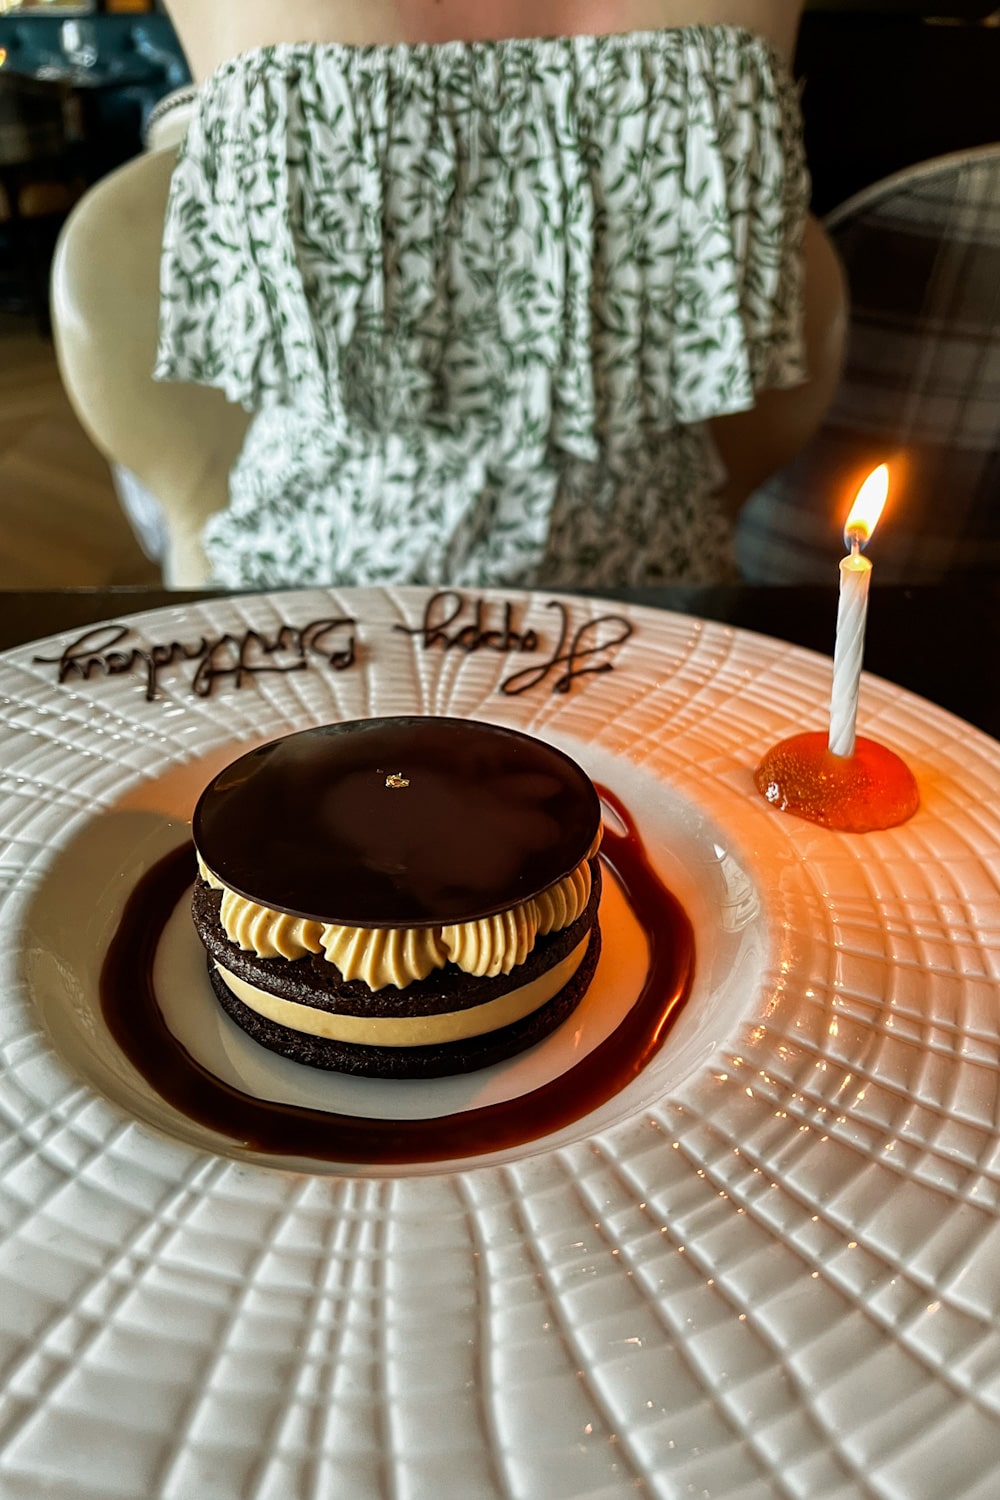 Blogger Stephanie Ziajka shares her Happy Birthday Chocotorta dessert from the Four Seasons St Louis Cinder House restaurant on Diary of a Debutante